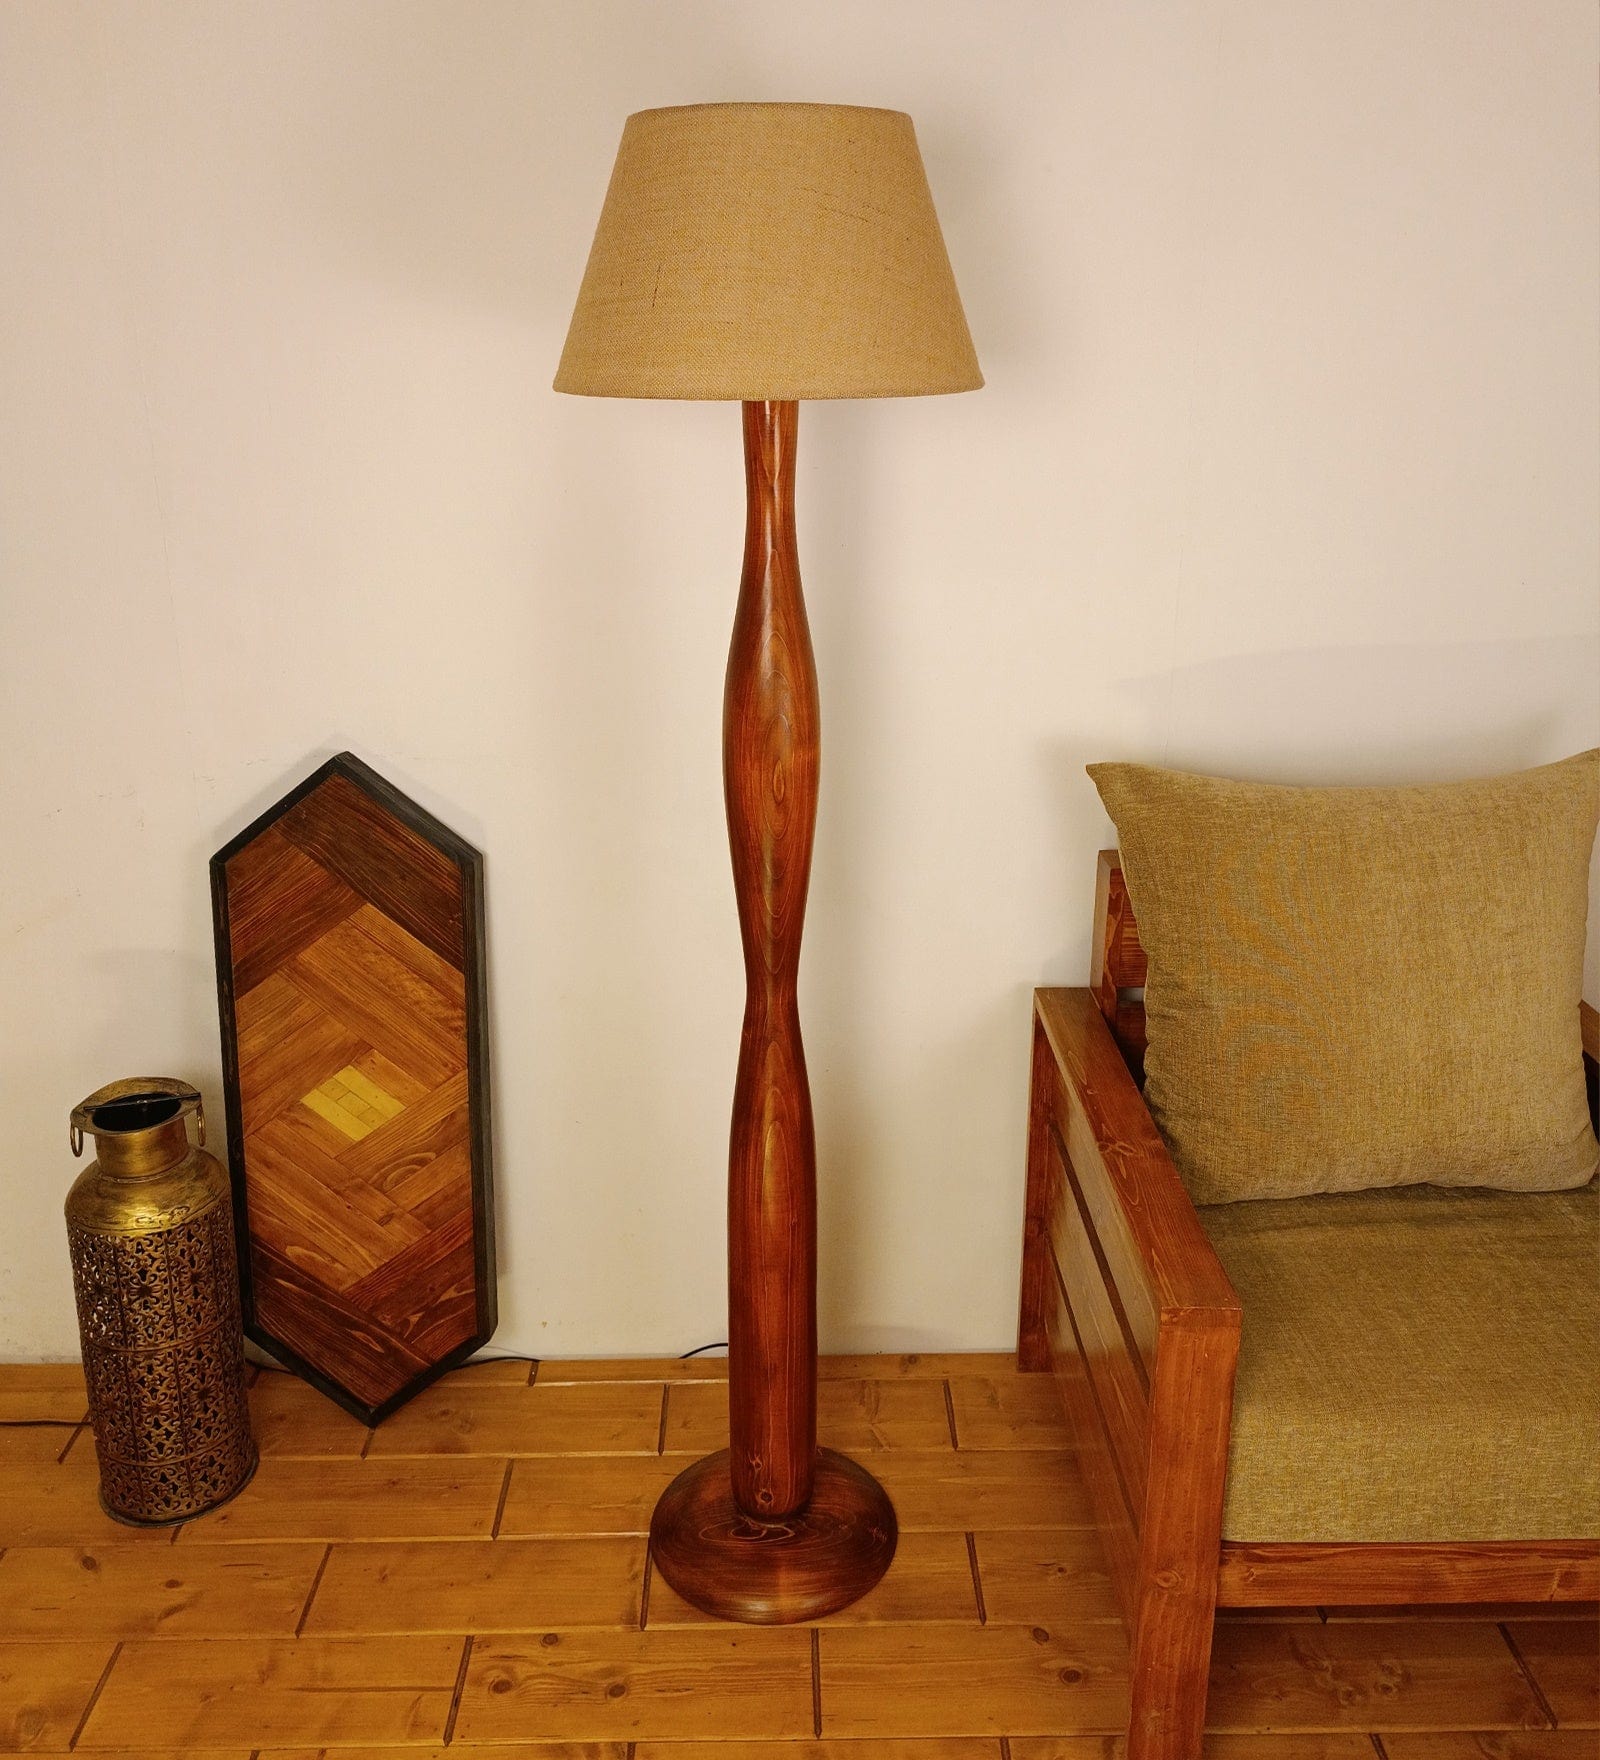 Aristro Wooden Floor Lamp with Brown Base and Jute Fabric Lampshade (BULB NOT INCLUDED)